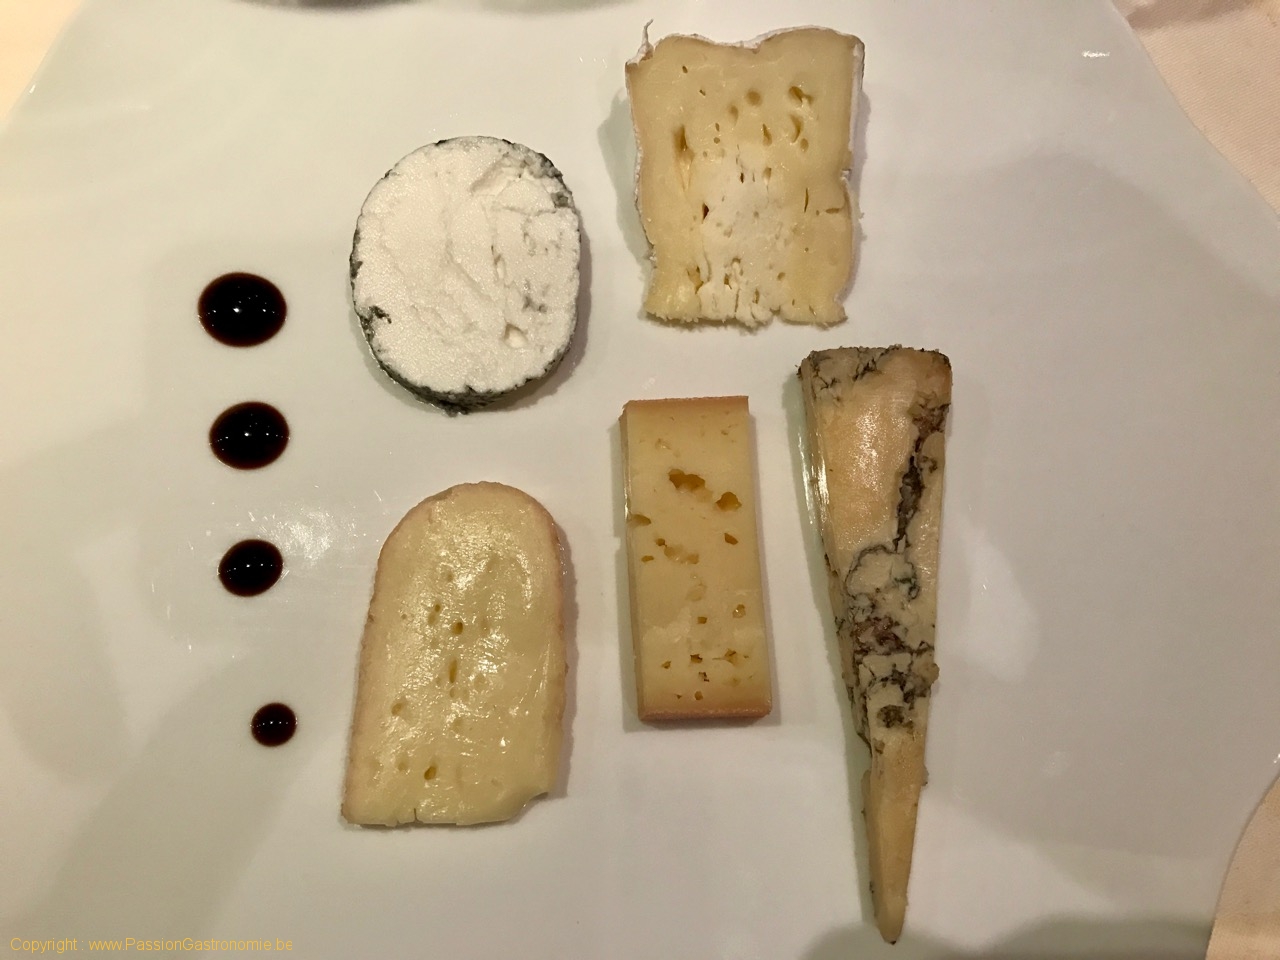 Restaurant Philippe Meyers - Les fromages